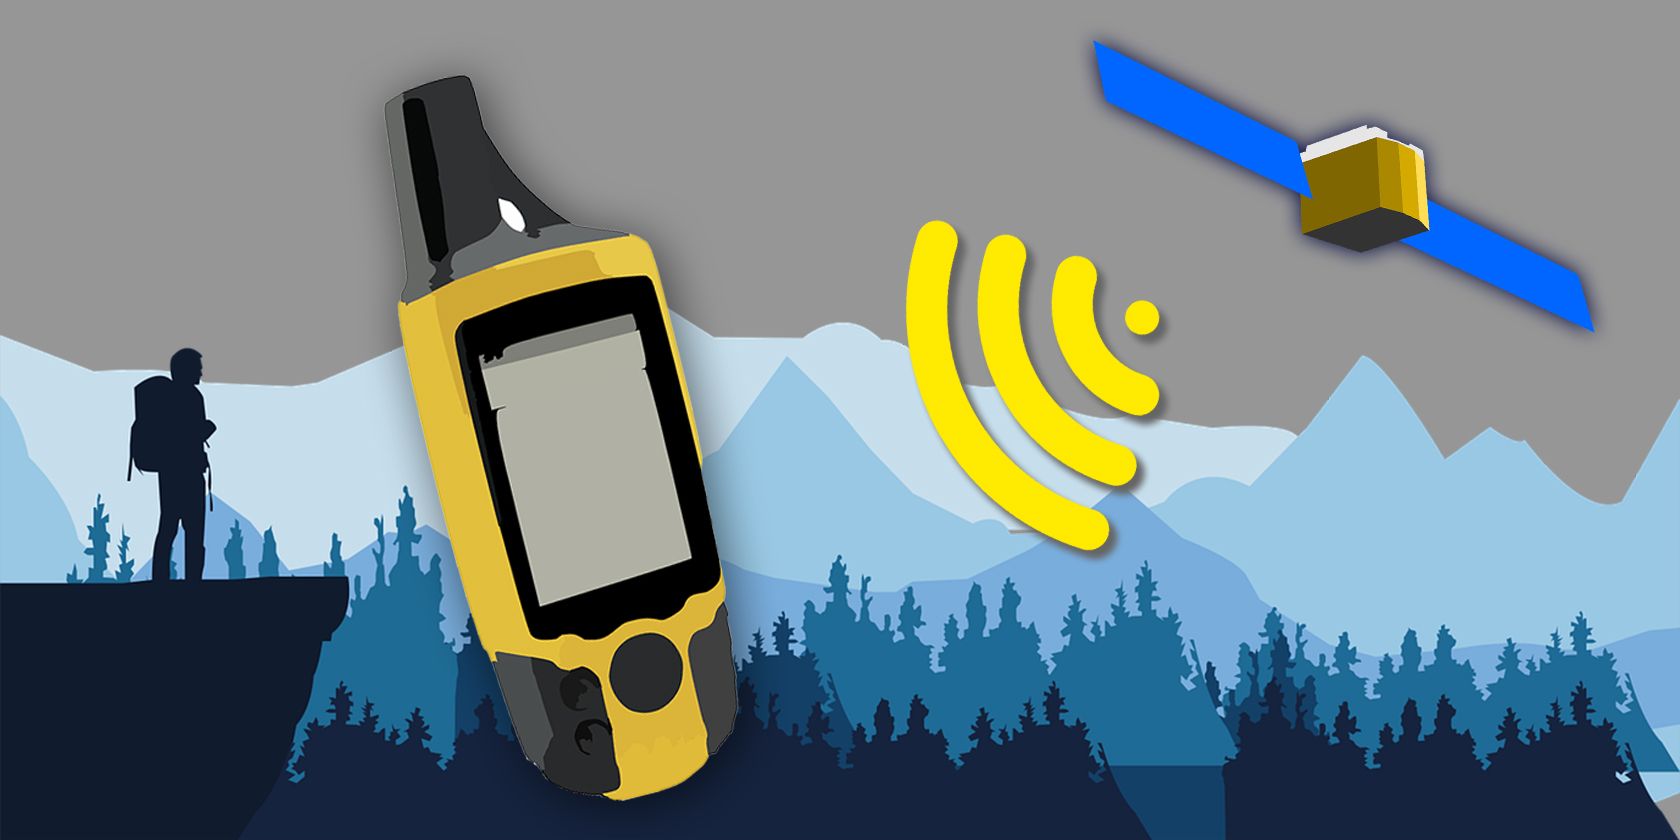 vector graphic of a handheld GPS communicating with a GPS satellite